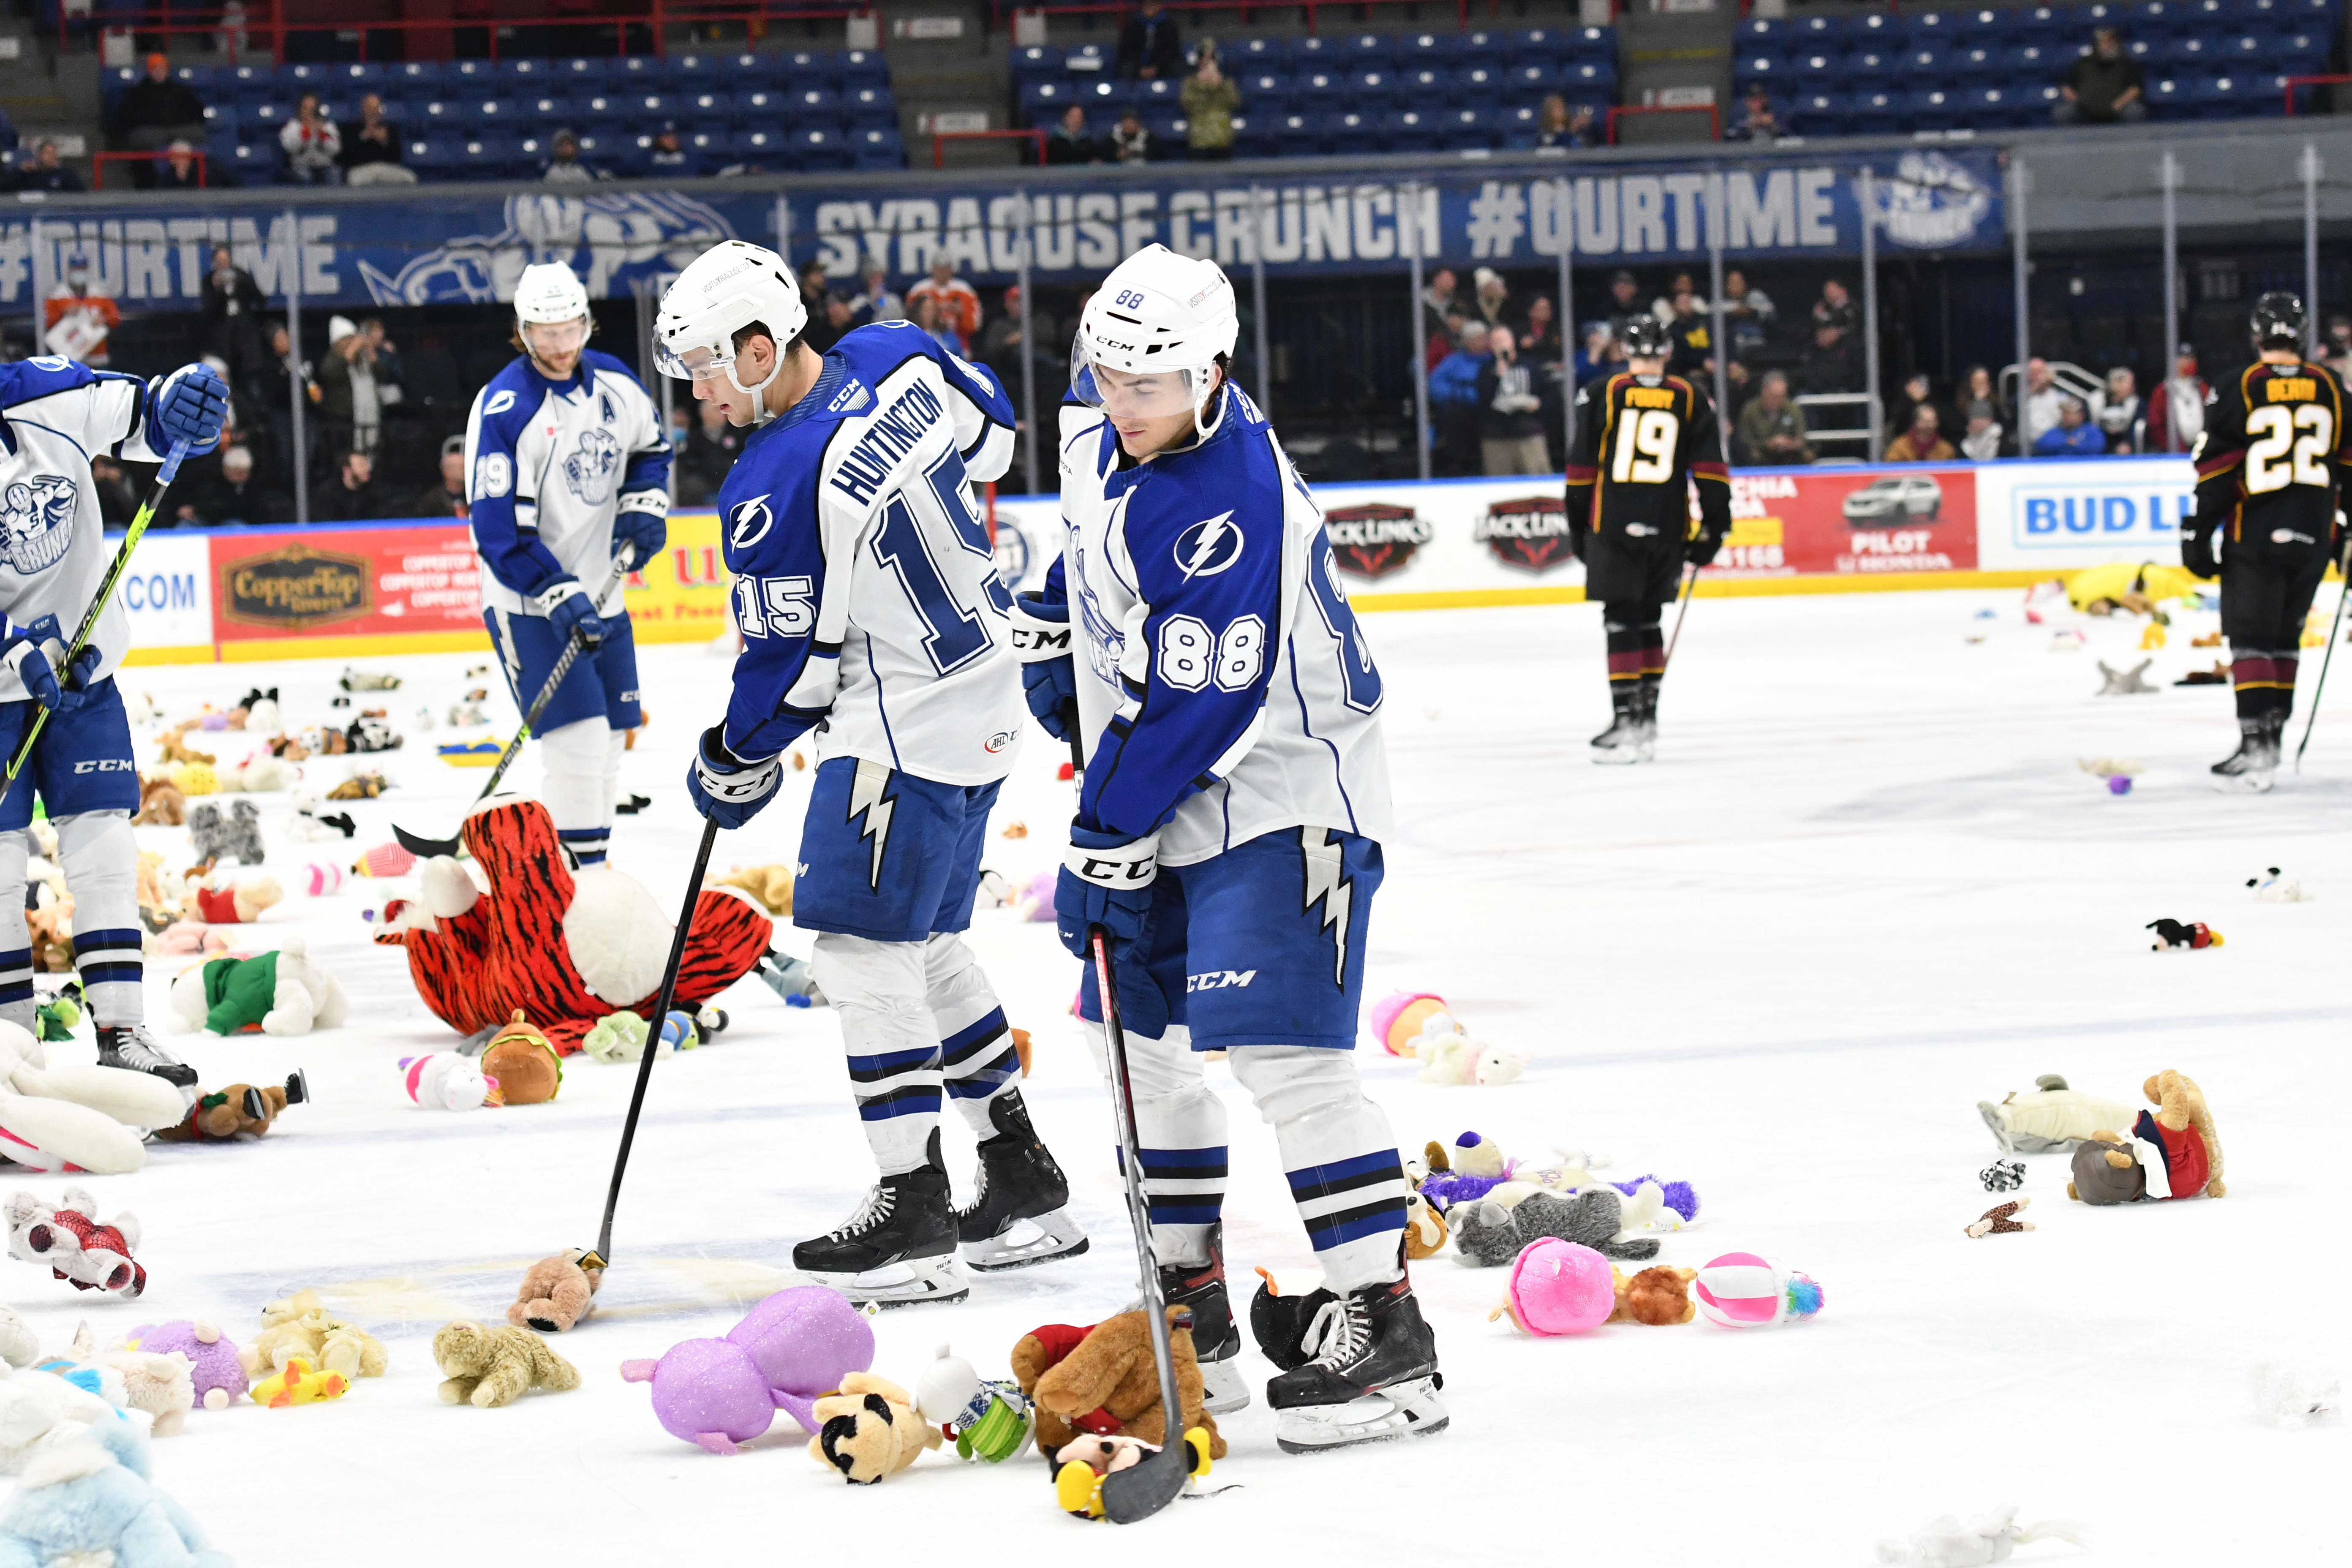 Game 3 Preview: Syracuse Crunch at Cleveland Monsters - Syracuse Crunch